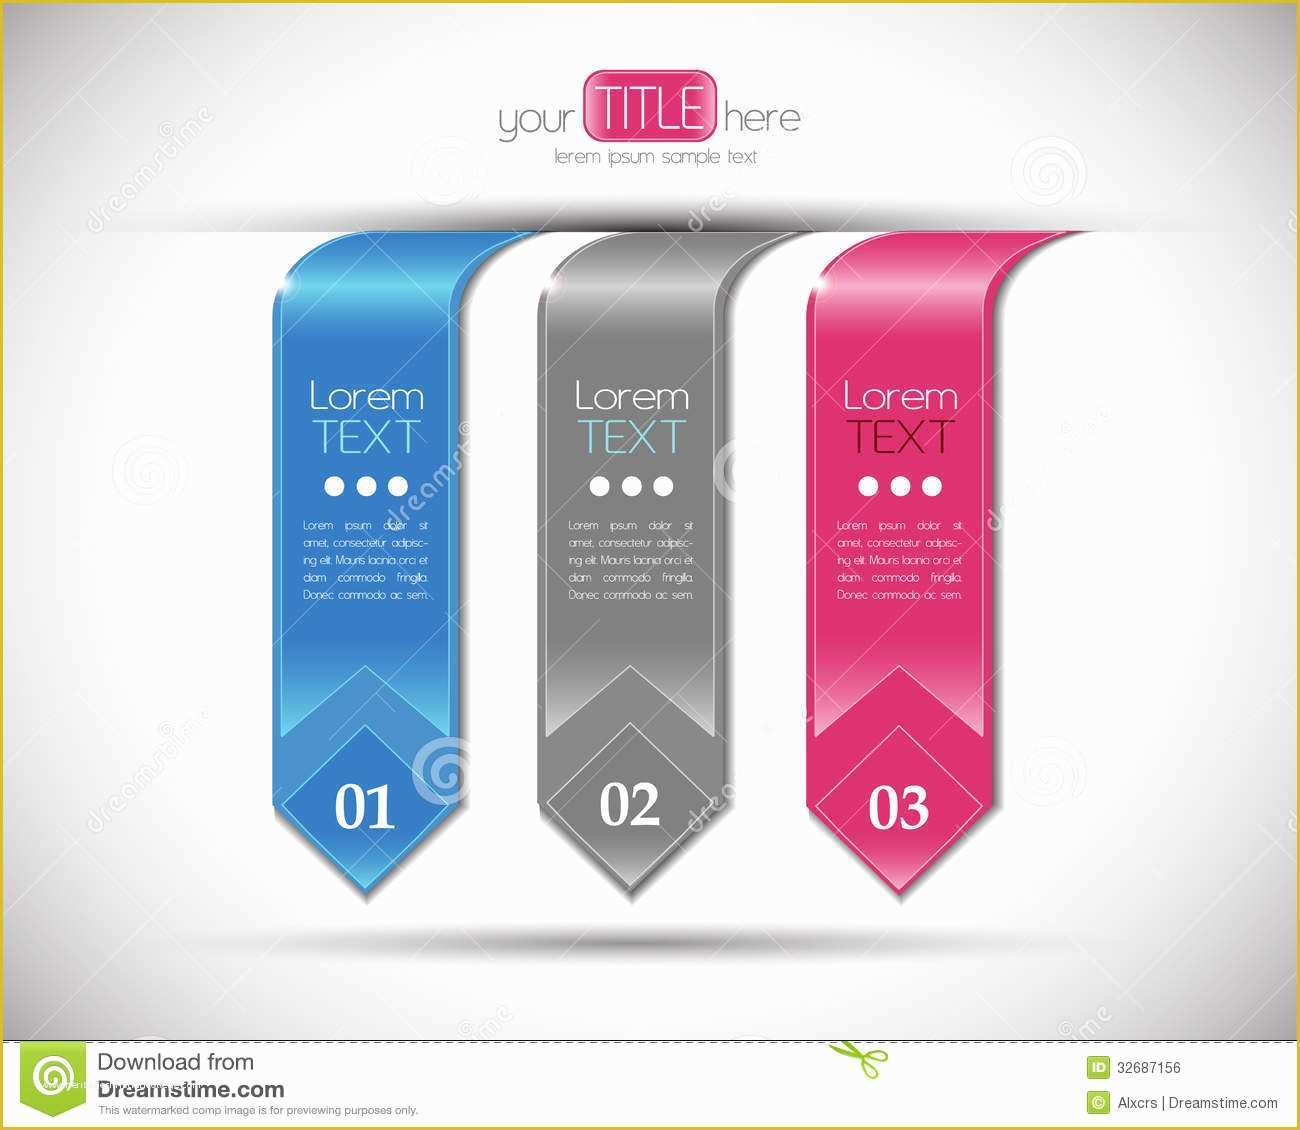 Free Graphic Design Templates Of Modern Number Banners Design Template Royalty Free Stock